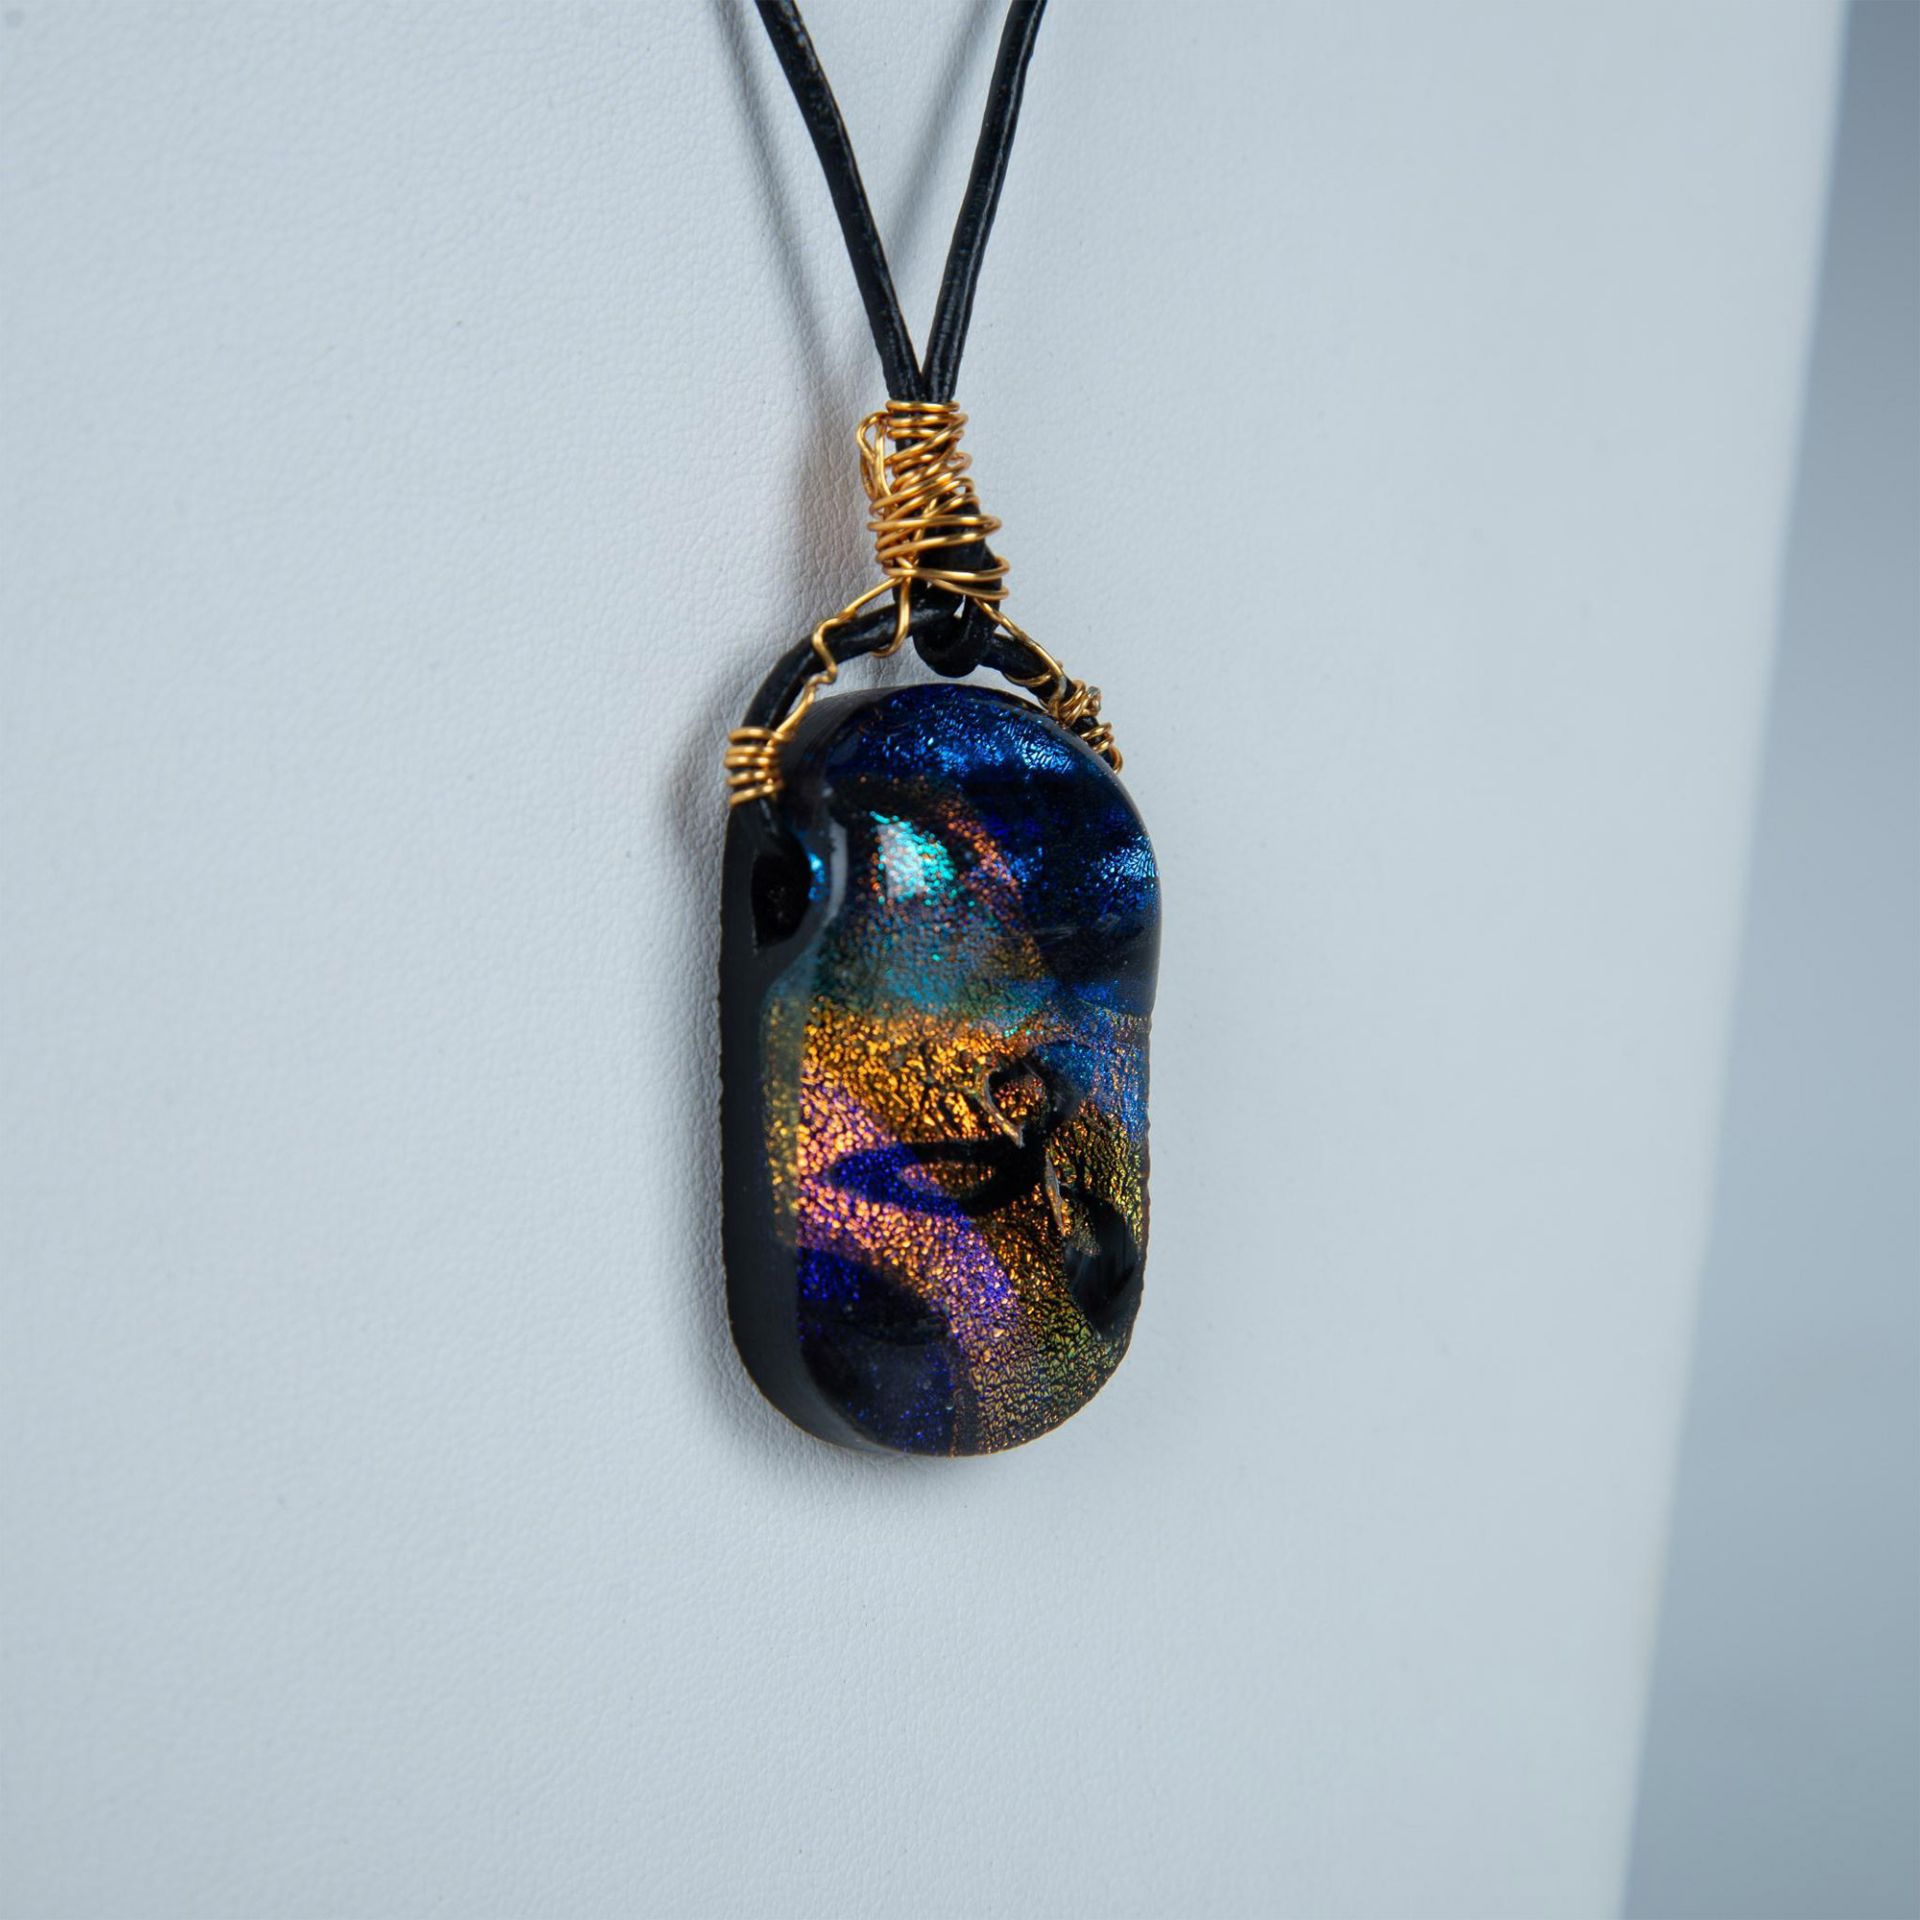 Wire Wrapped Dichroic Fused Glass Pendant Necklace - Image 2 of 4